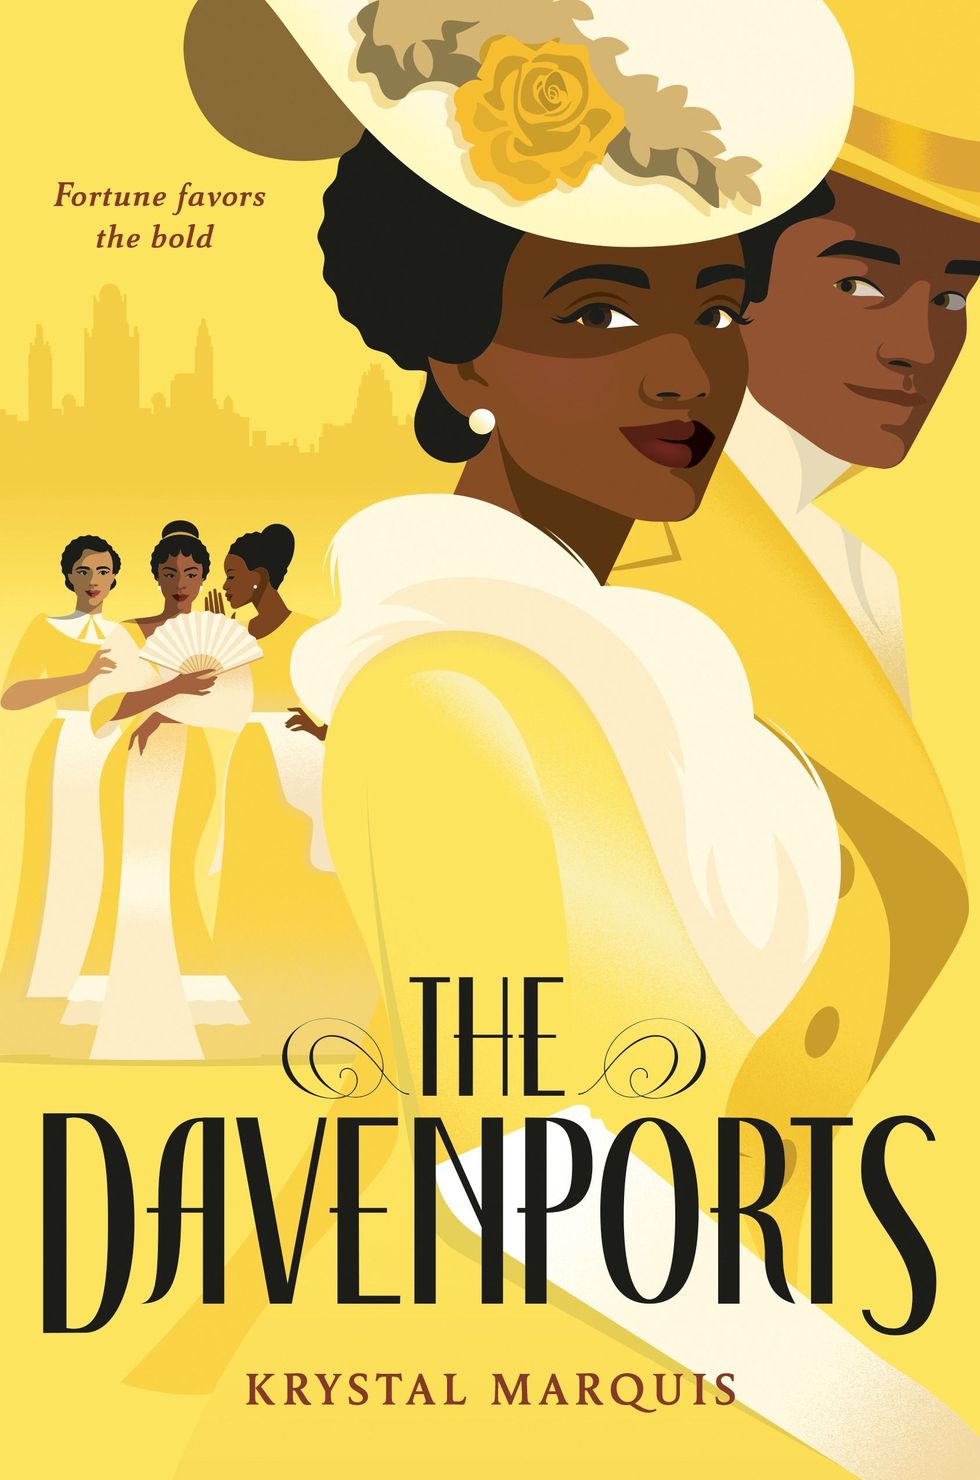 'The Davenports' by Krystal Marquis